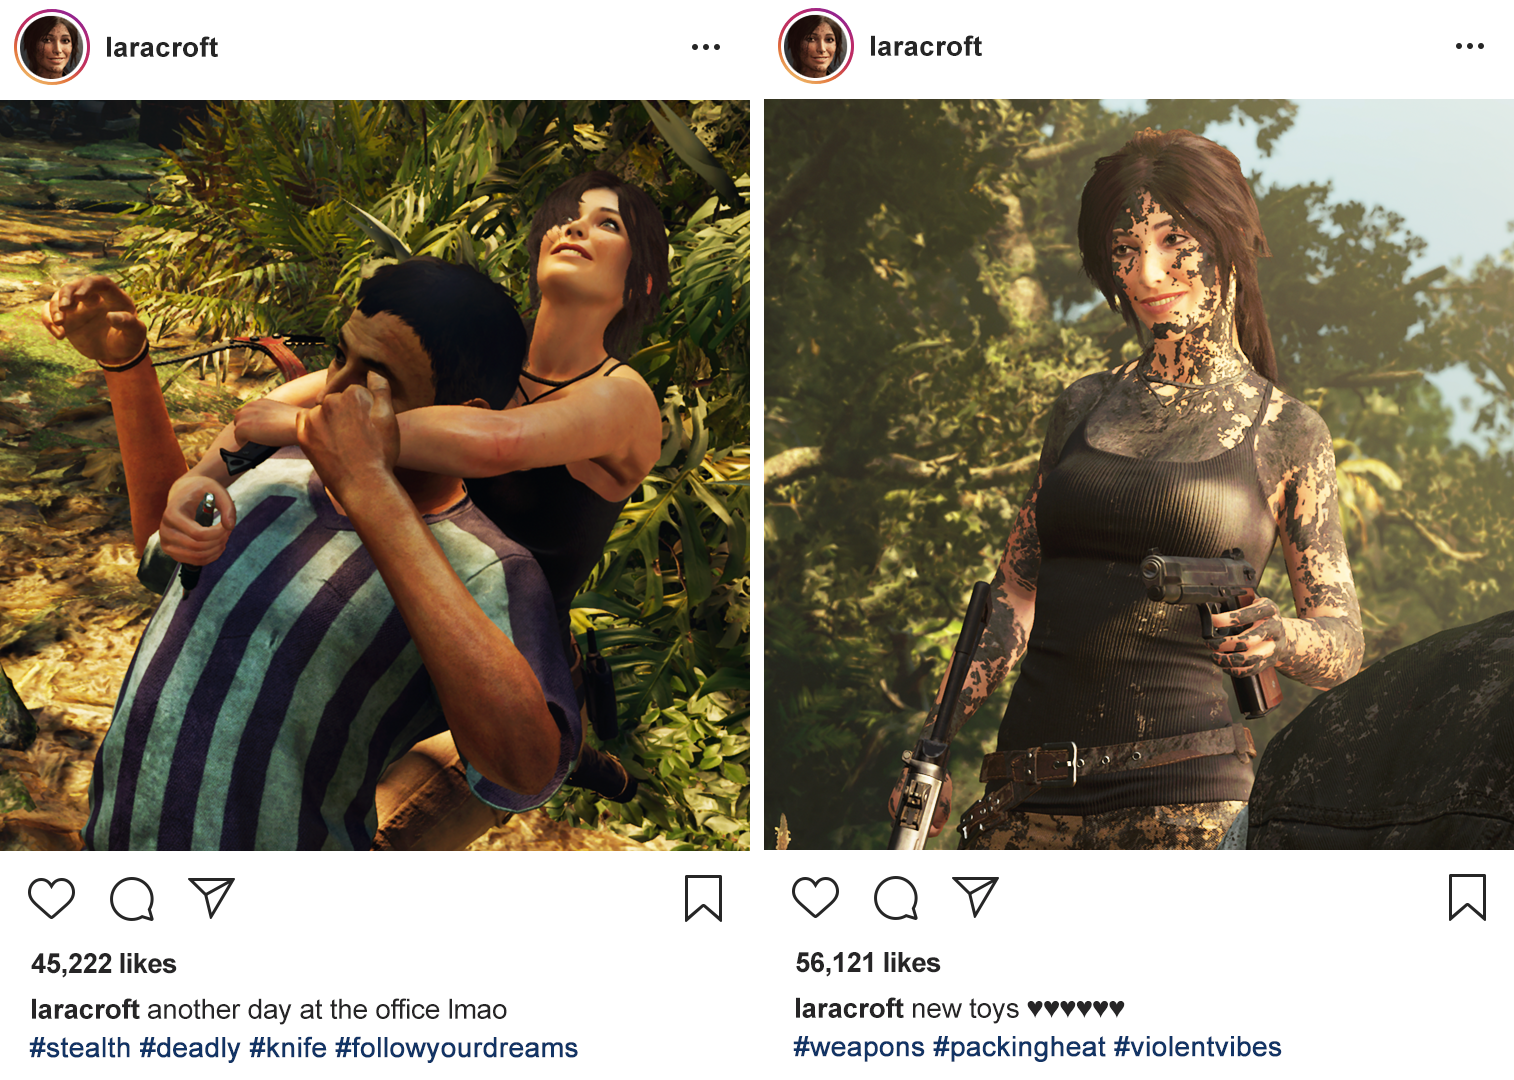 shadow of the tomb raider vs rise of the tomb raider